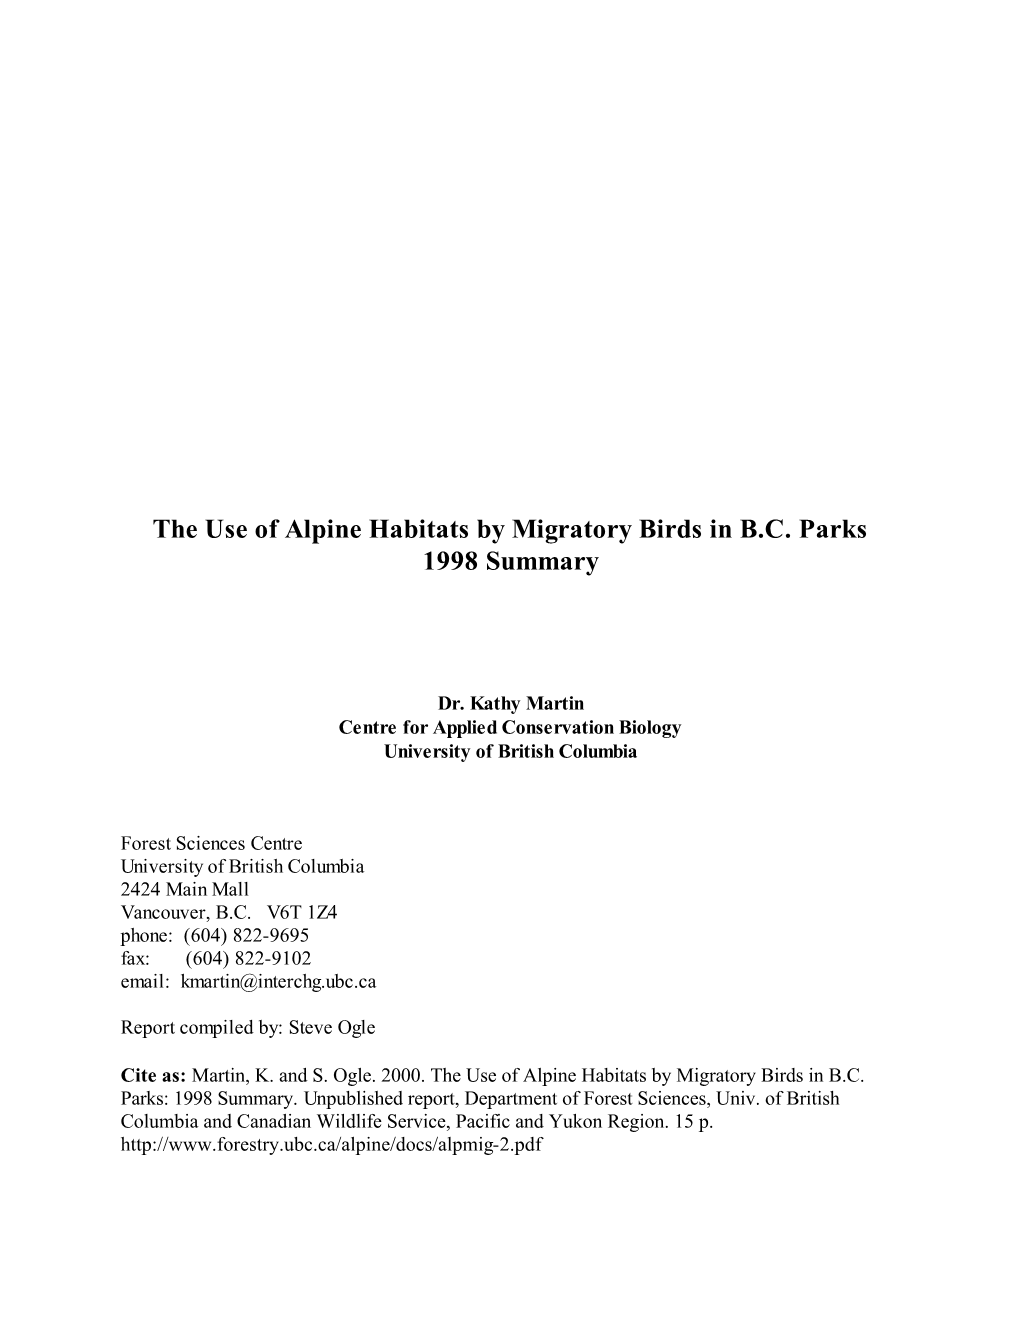 The Use of Alpine Habitats by Migratory Birds in B.C. Parks 1998 Summary